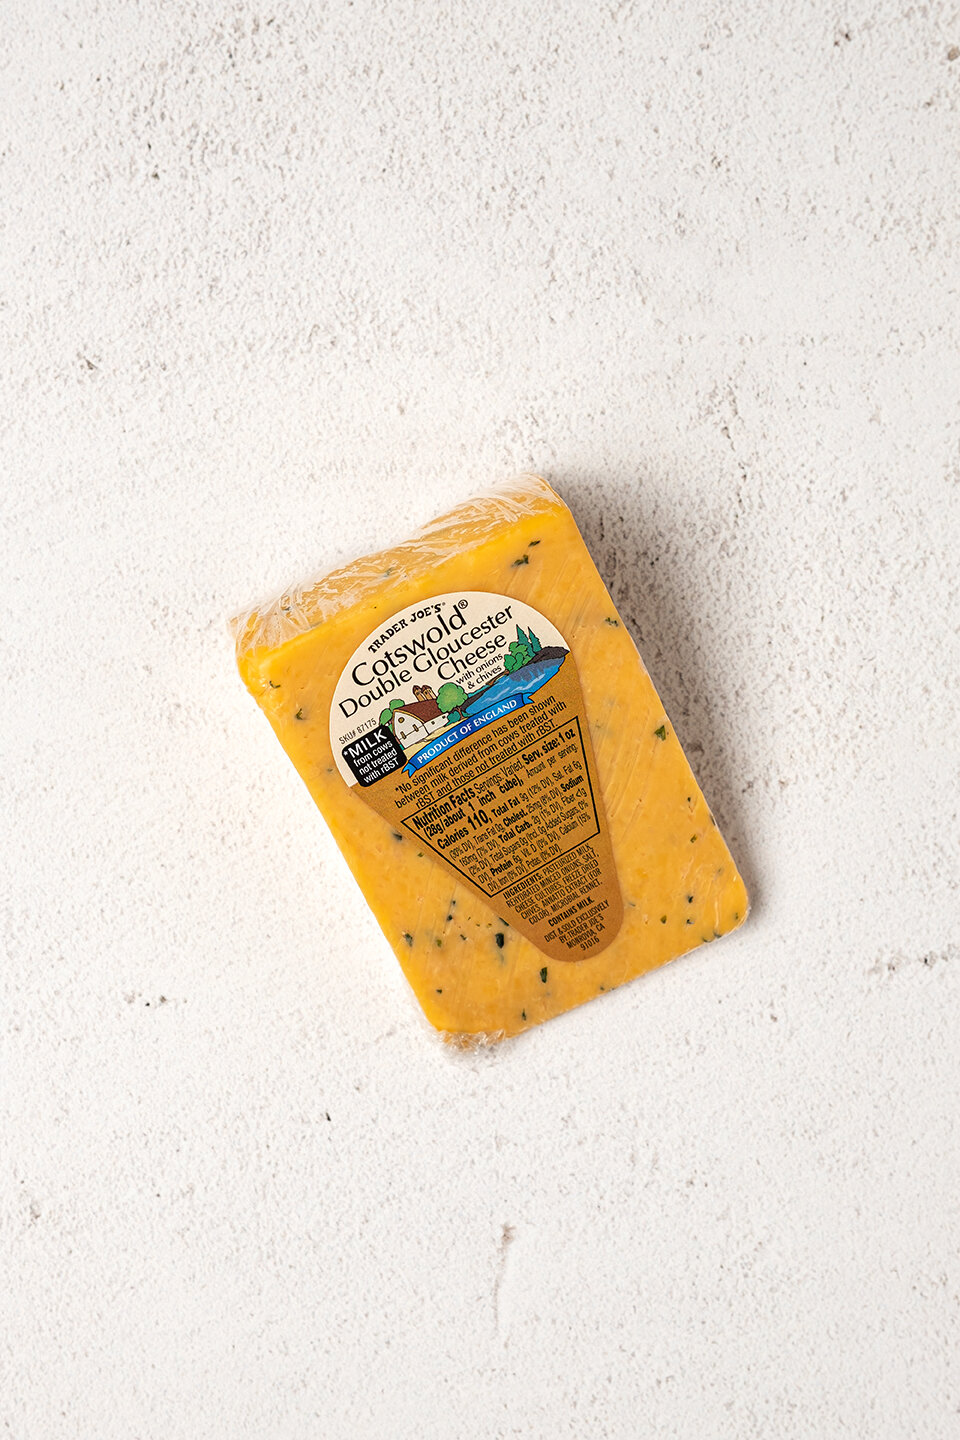 Cotswold Double Gloucester Cheese $5.09